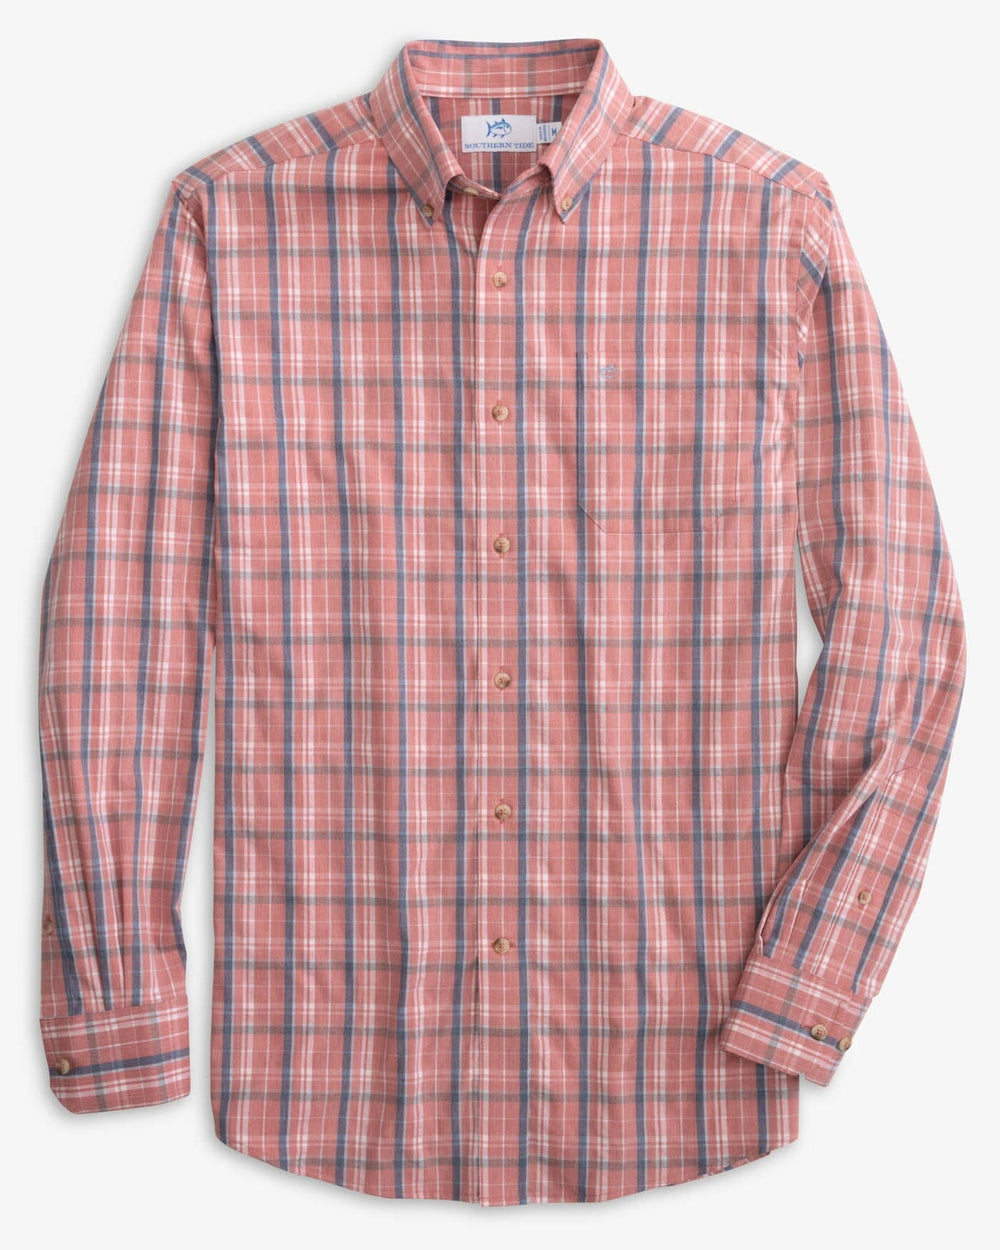 The front view of the Southern Tide Coastal Passage Ashleland Plaid Sport Shirts by Southern Tide - Heather Dusty Coral